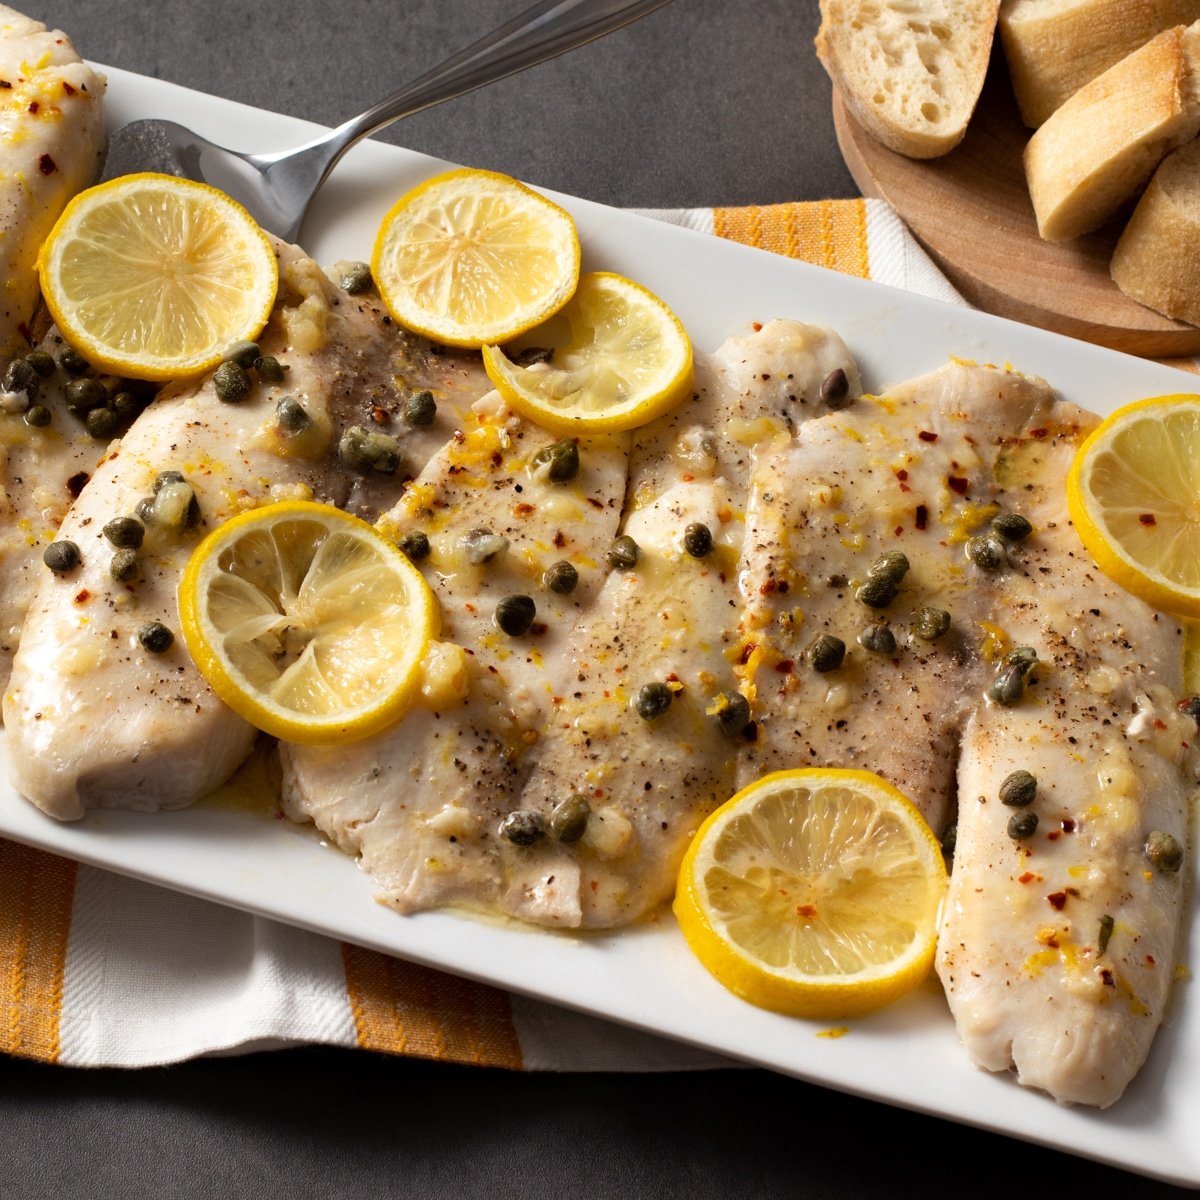 Baked tilapia fillets with capers and lemon slices on a white platter.